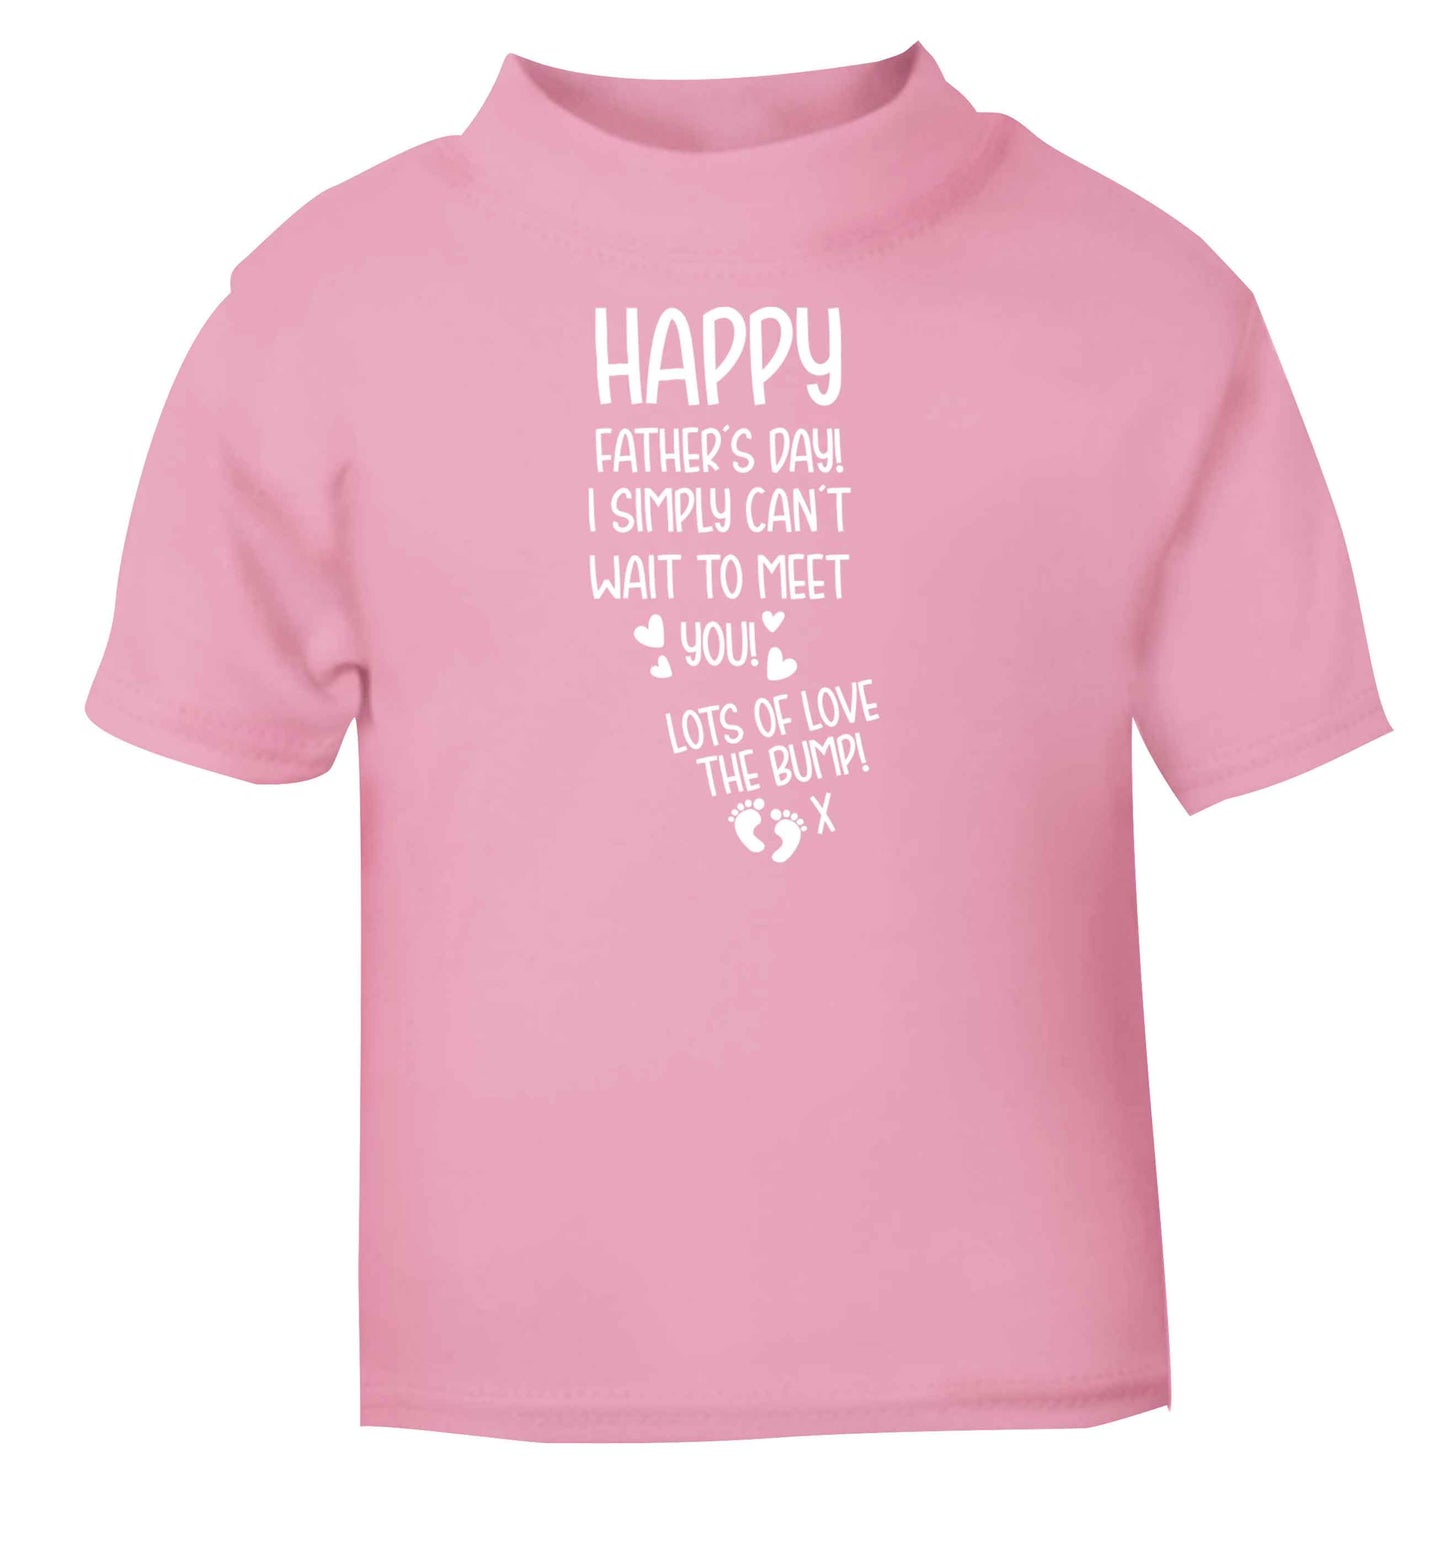 Happy Father's day daddy I can't wait to meet you lot's of love the bump! light pink baby toddler Tshirt 2 Years